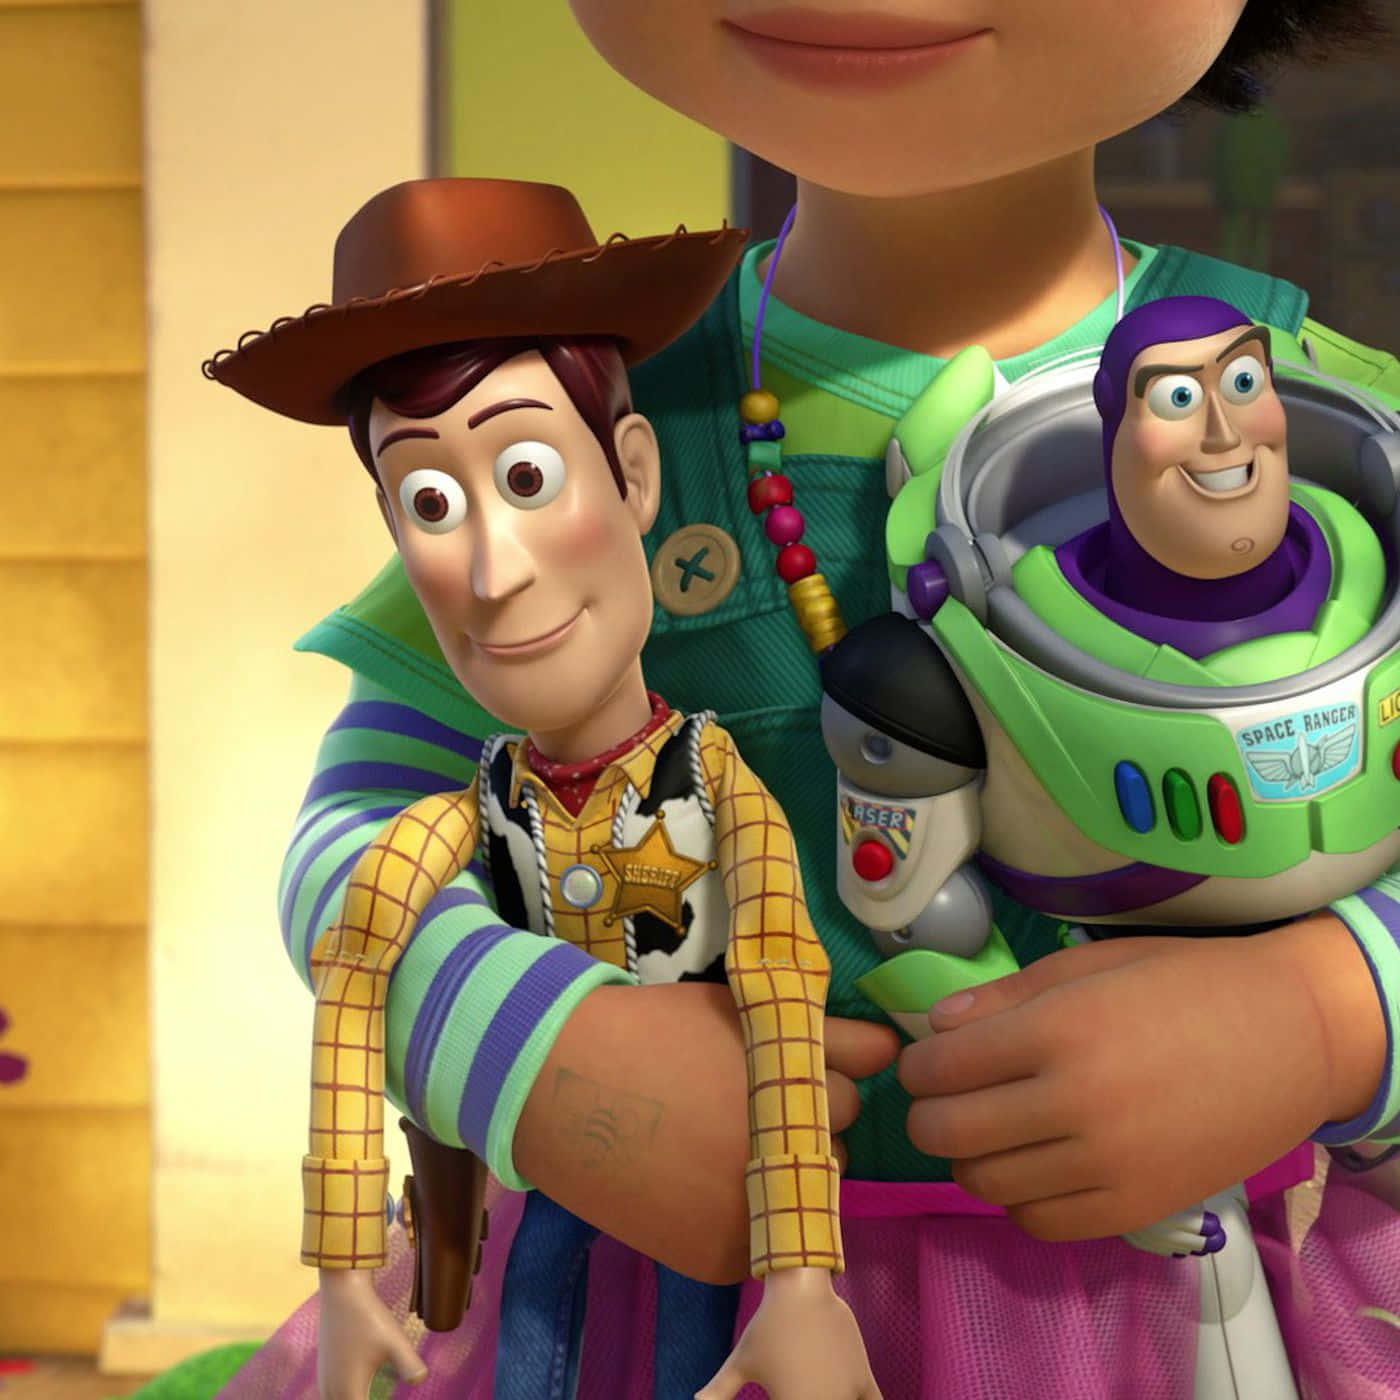 Toy Story 4 Woody Buzz Lightyear Picture